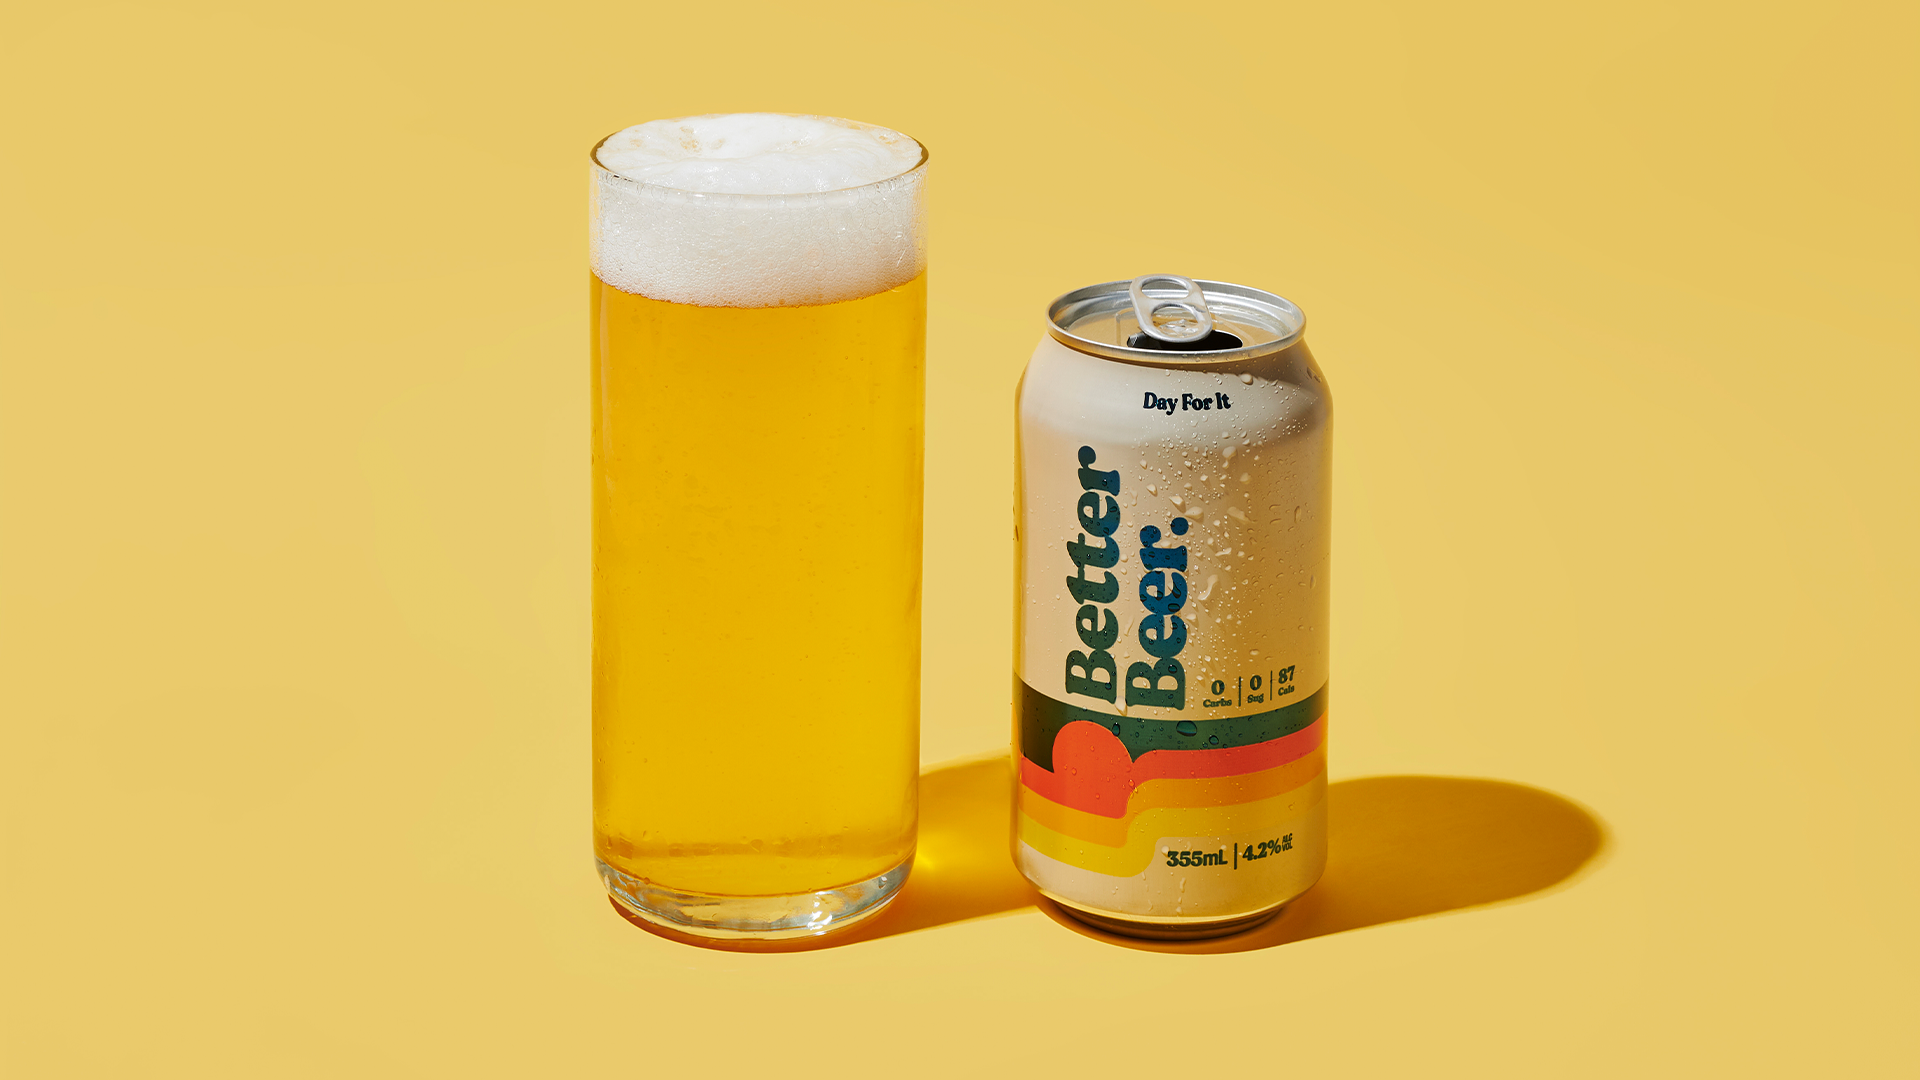 Better Beer can and glass on yellow background